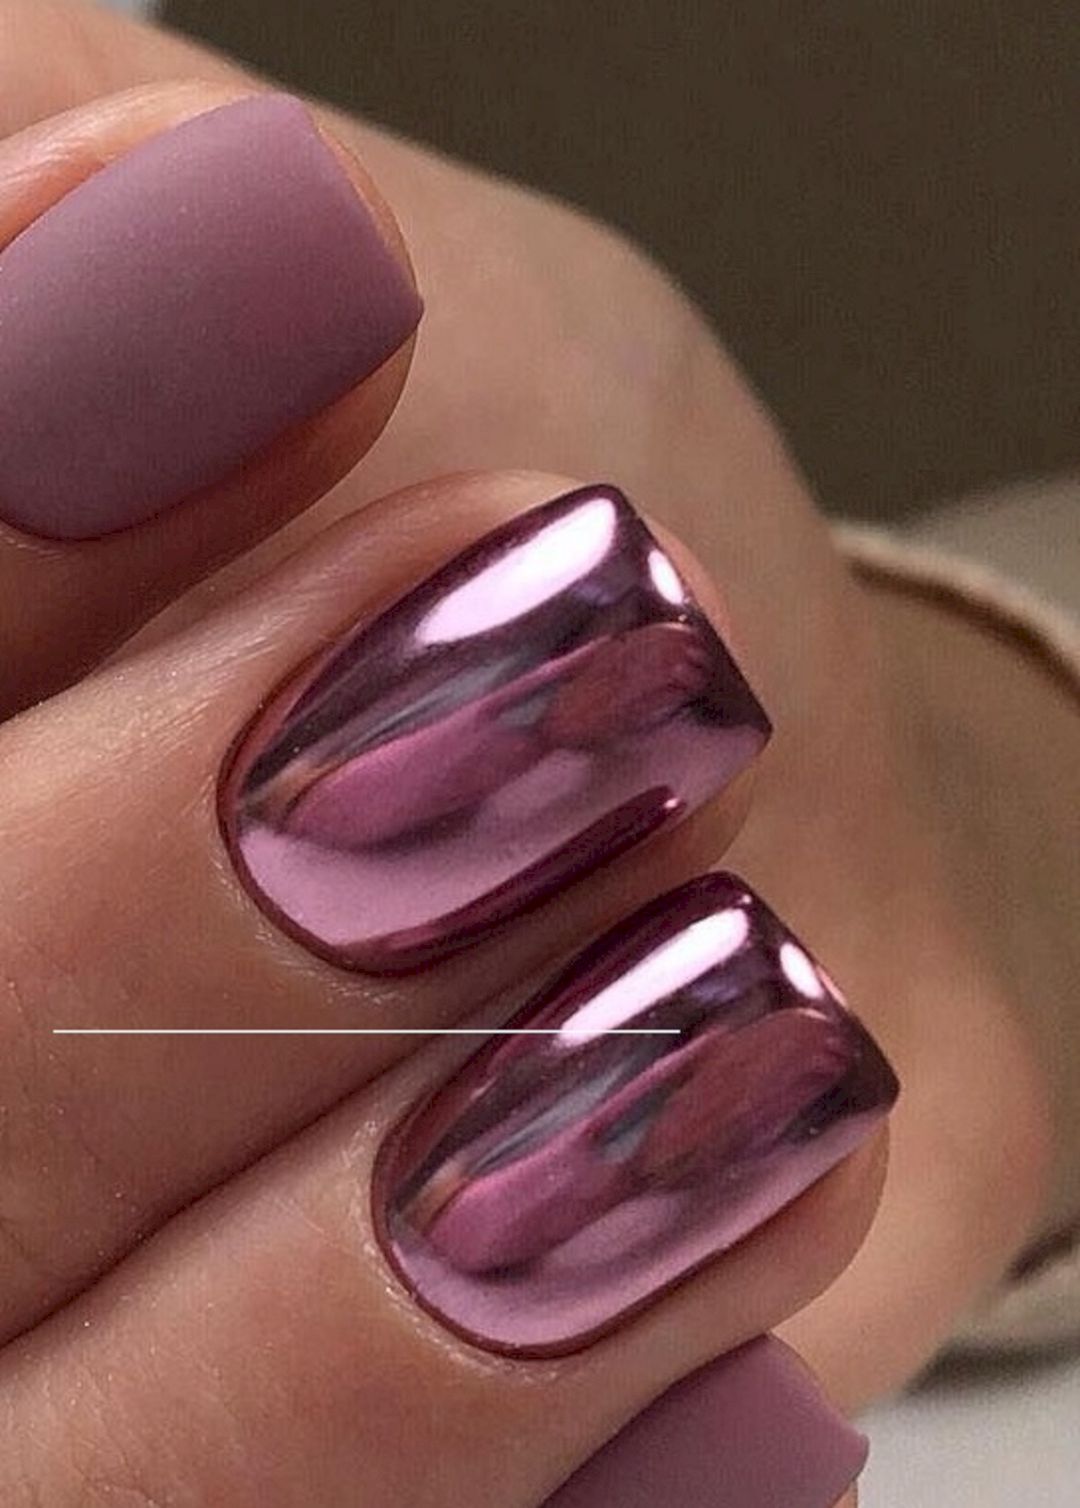 Metallic pink nails from weheart.it